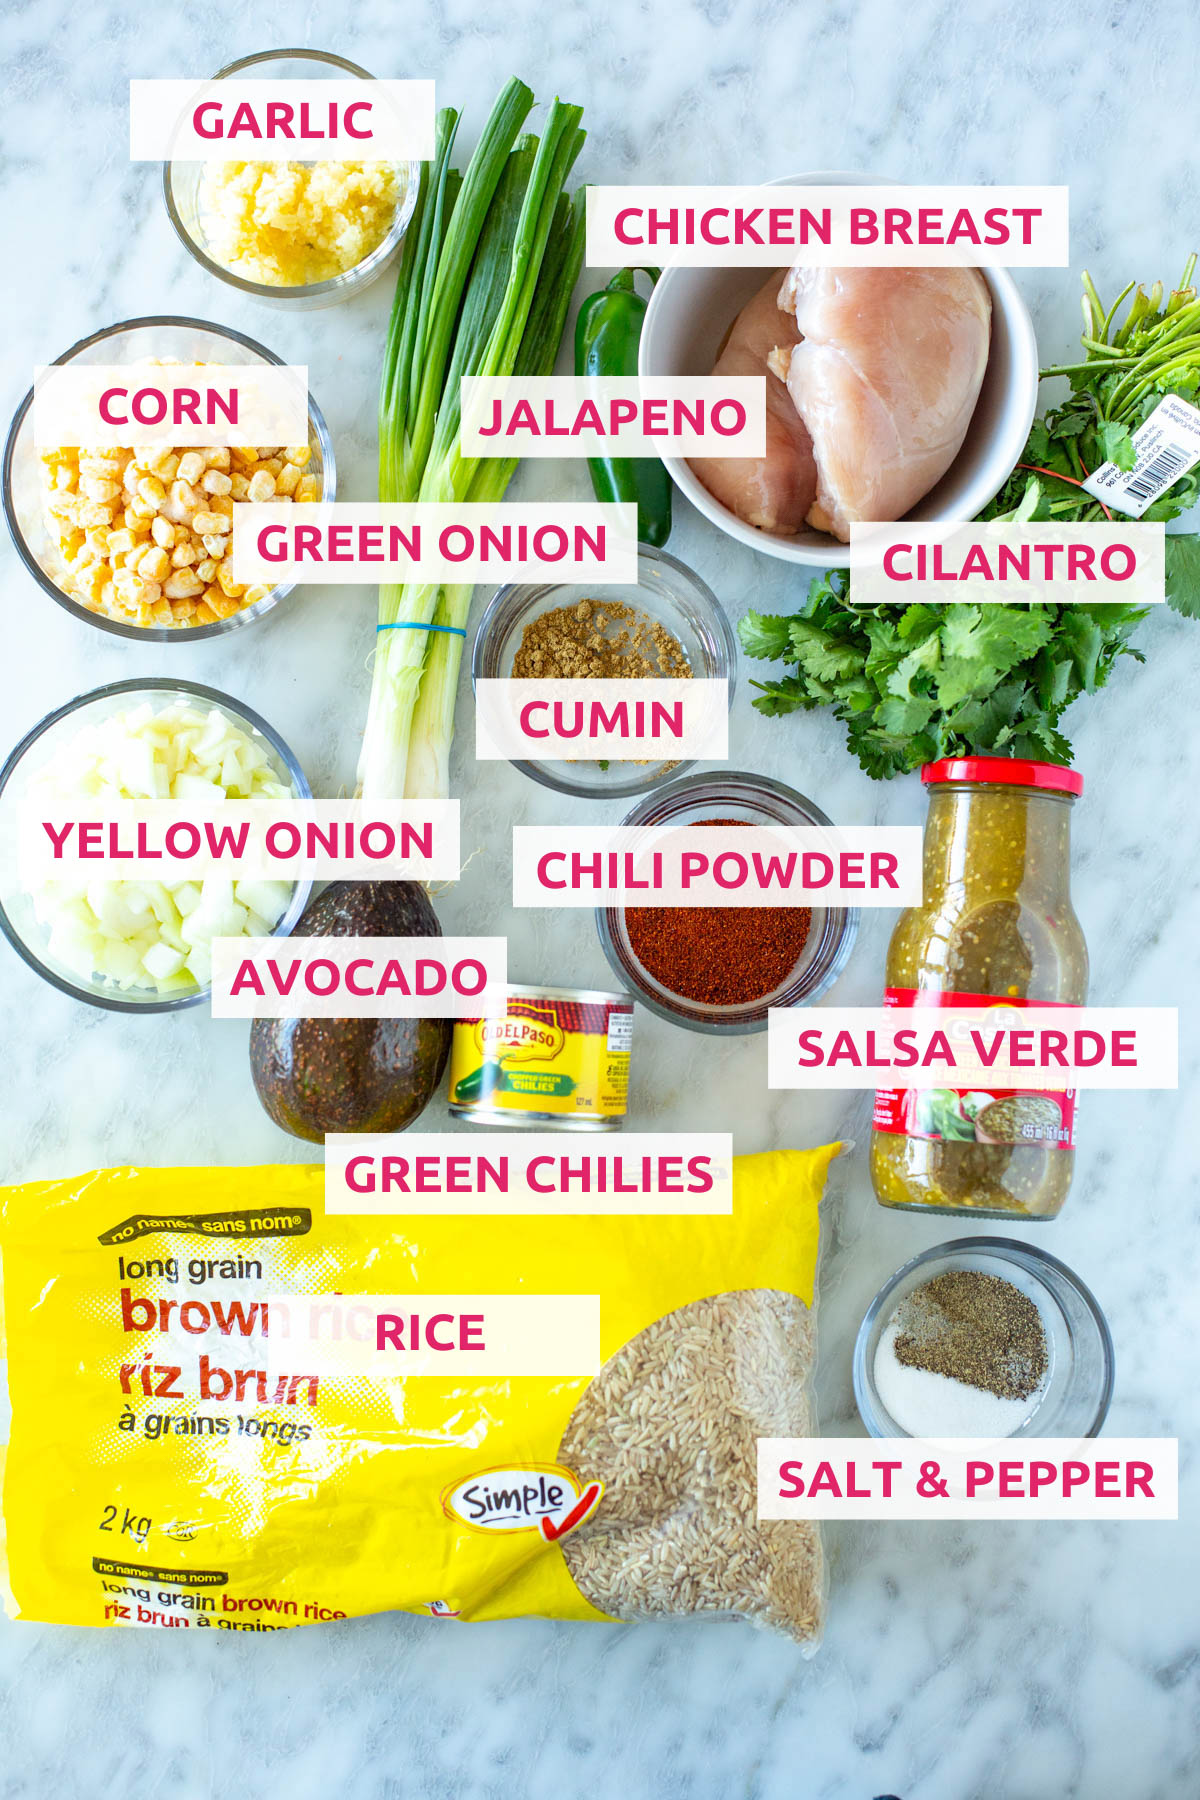 Ingredients for salsa verde chicken: rice, chicken breasts, green onions, garlic, corn, jalapeno, cilantro, yellow onion, avocado, green chilies, chili powder, salsa verde and salt and pepper.